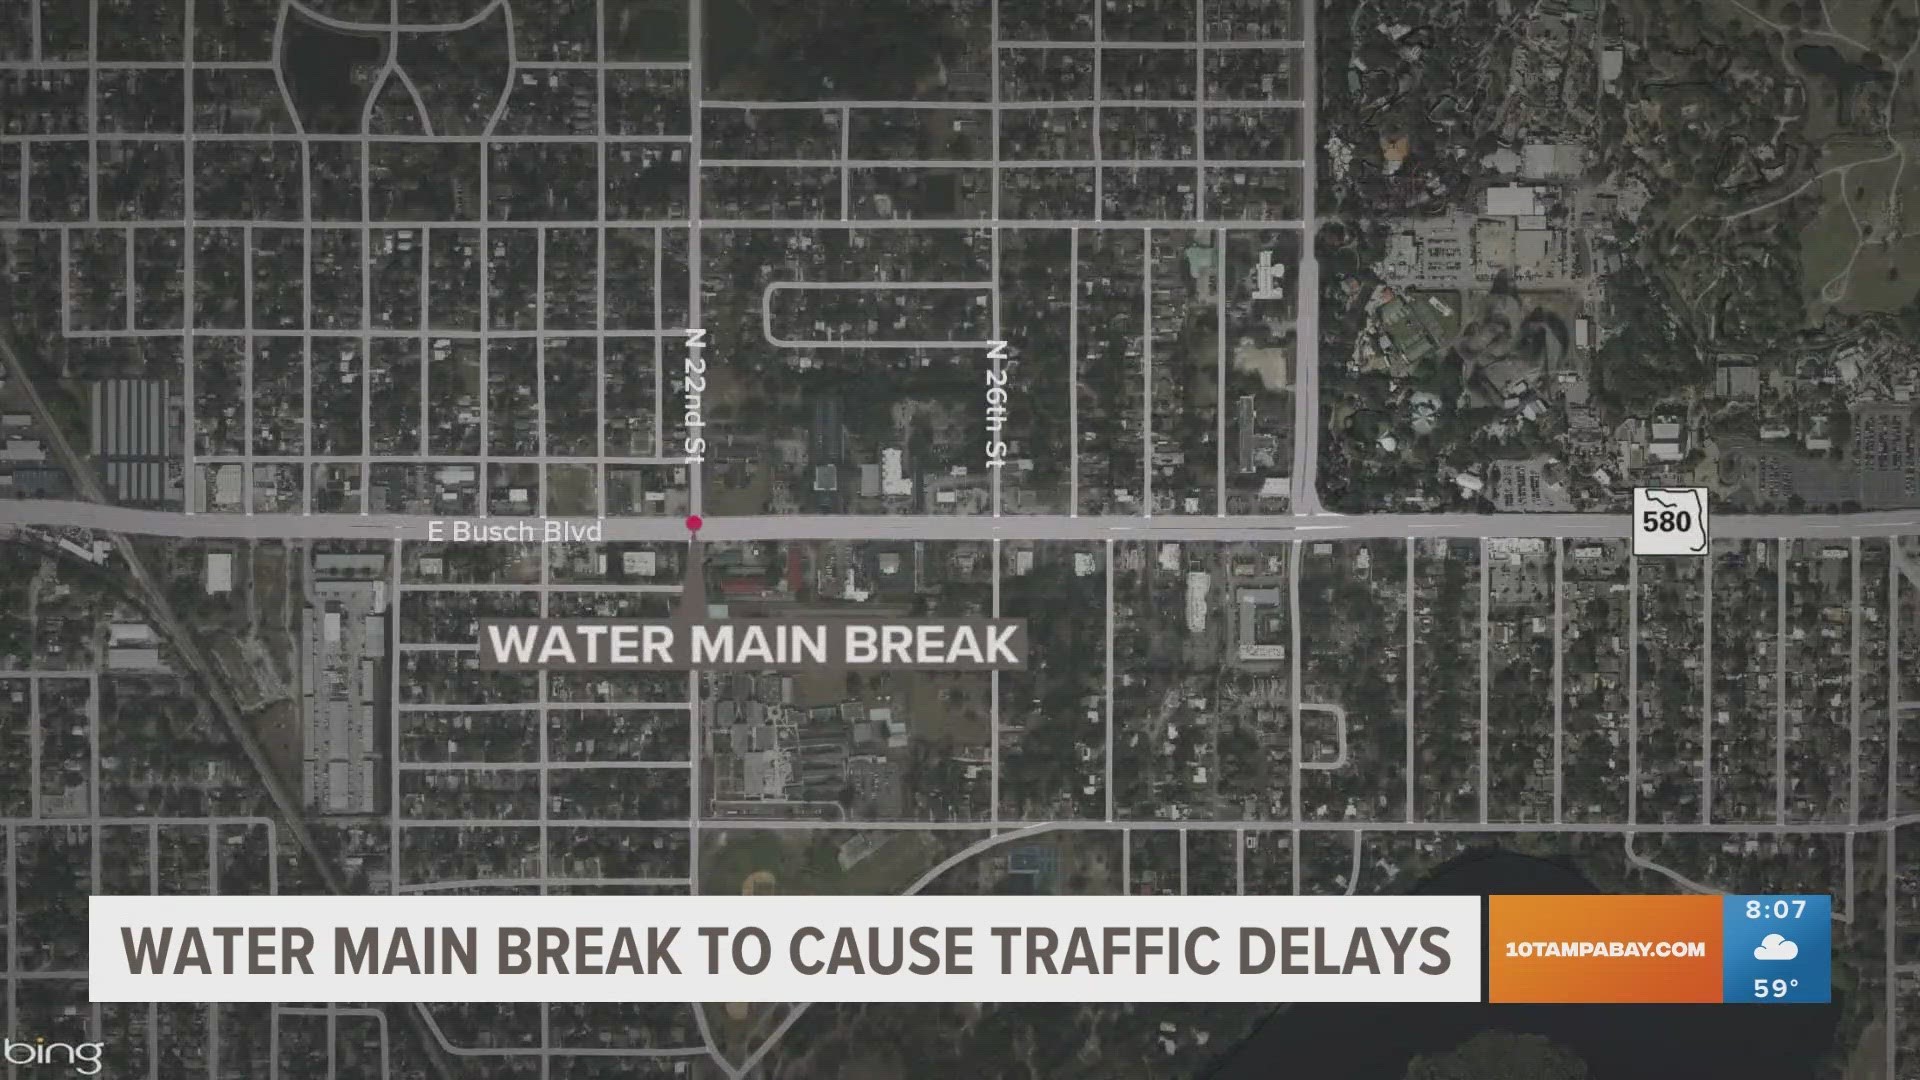 The Tampa Water Department said a portion of East Busch Boulevard will be closed until Wednesday evening.